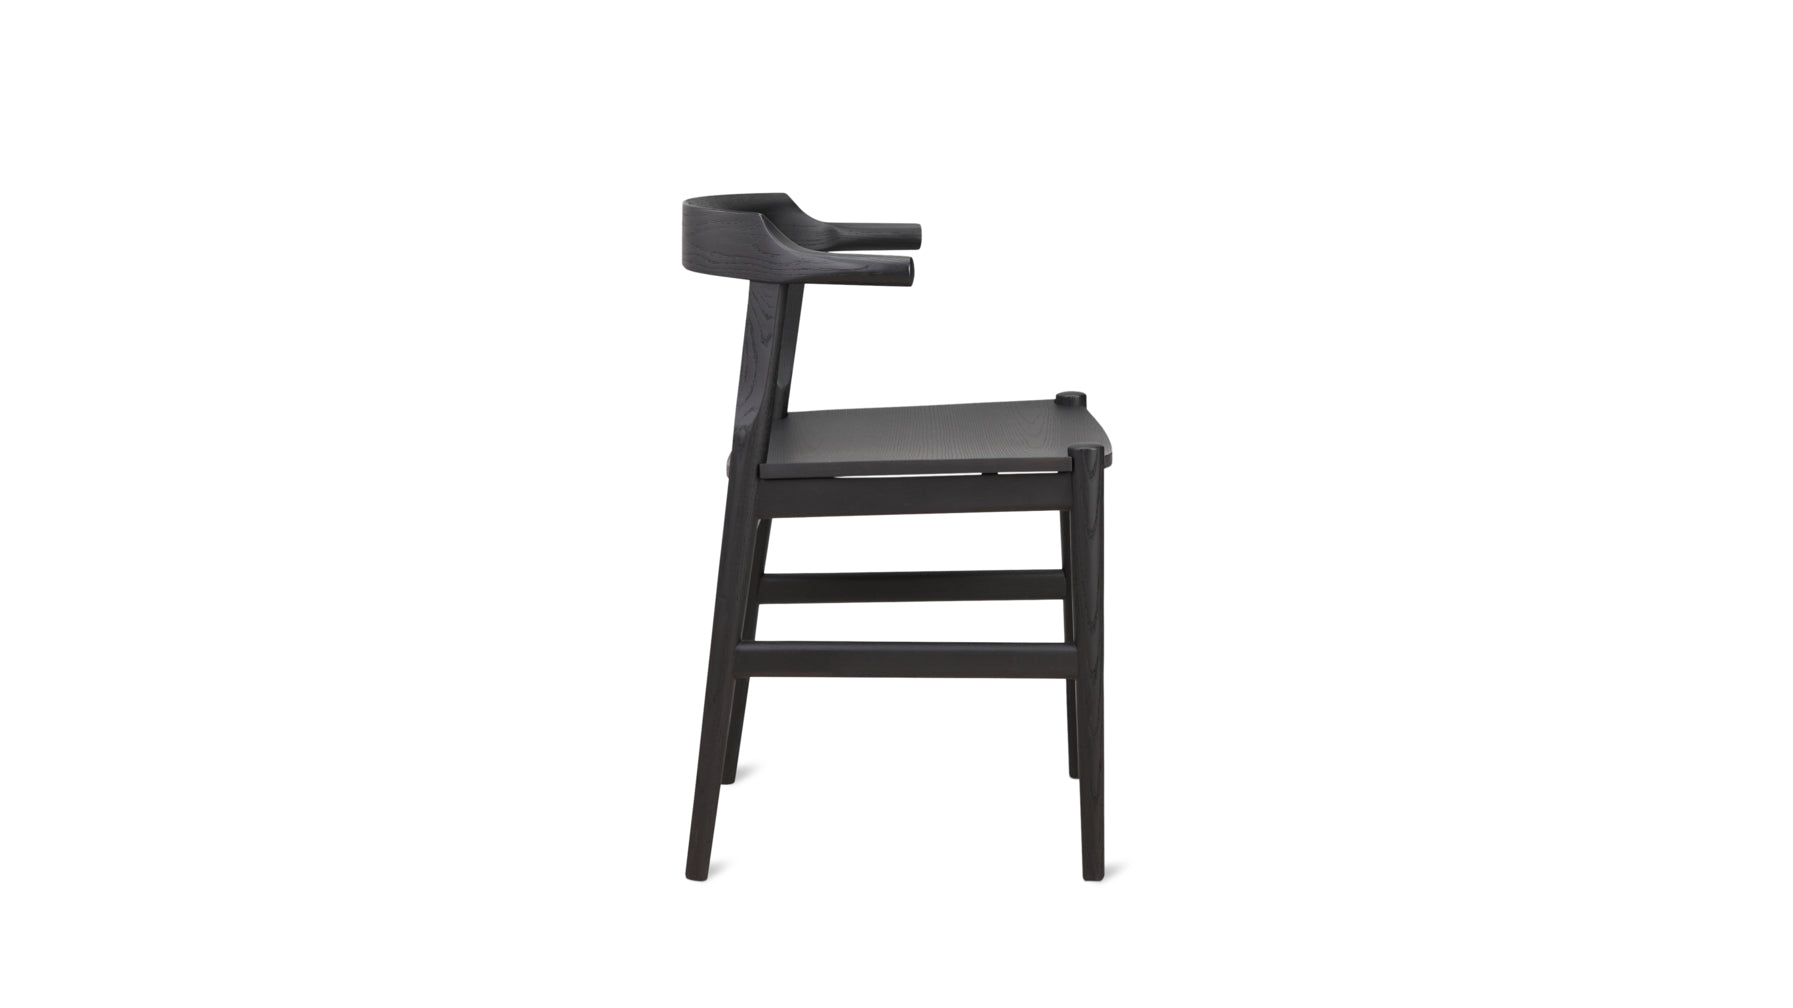 Tuck In Dining Chair, Black Ash, Wood Seat - Image 5